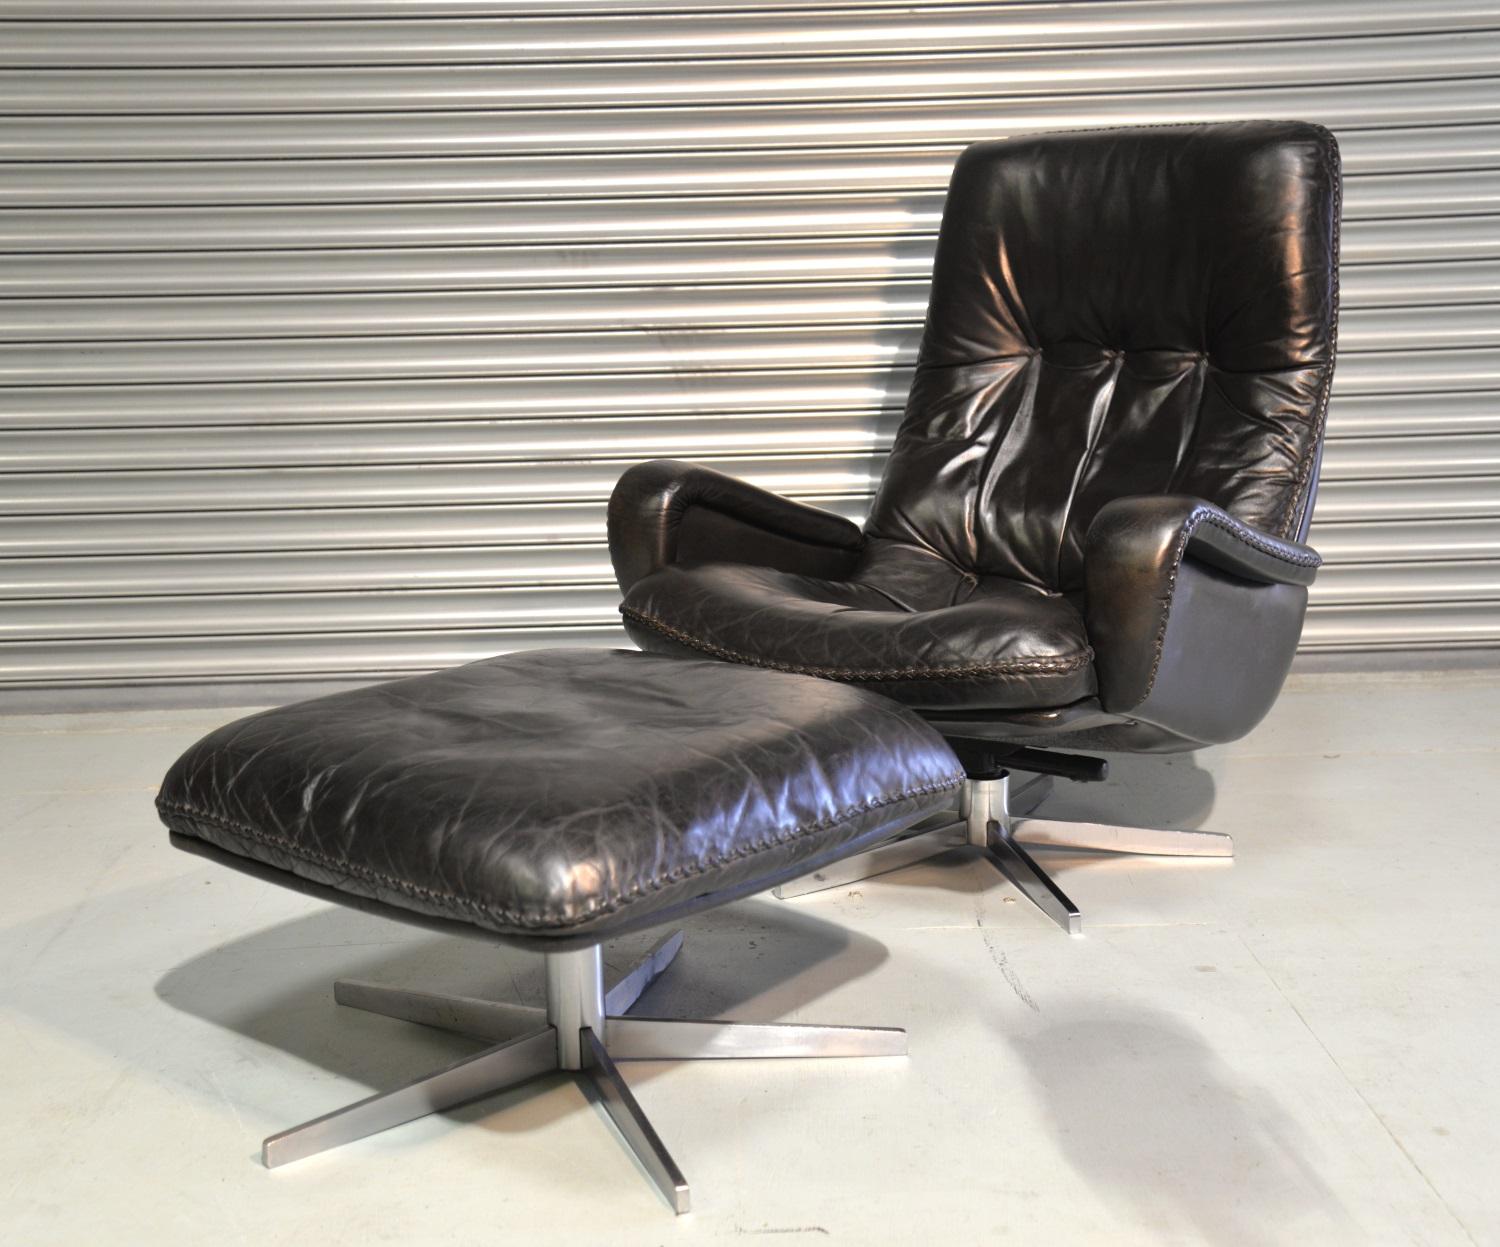 Discounted airfreight for our US and International customers ( from 2 weeks door to door).

The Cambridge Chair Company brings to you an ultra rare and highly desirable  De Sede S 231 swivel lounge club armchair and ottoman. Hand built in the late